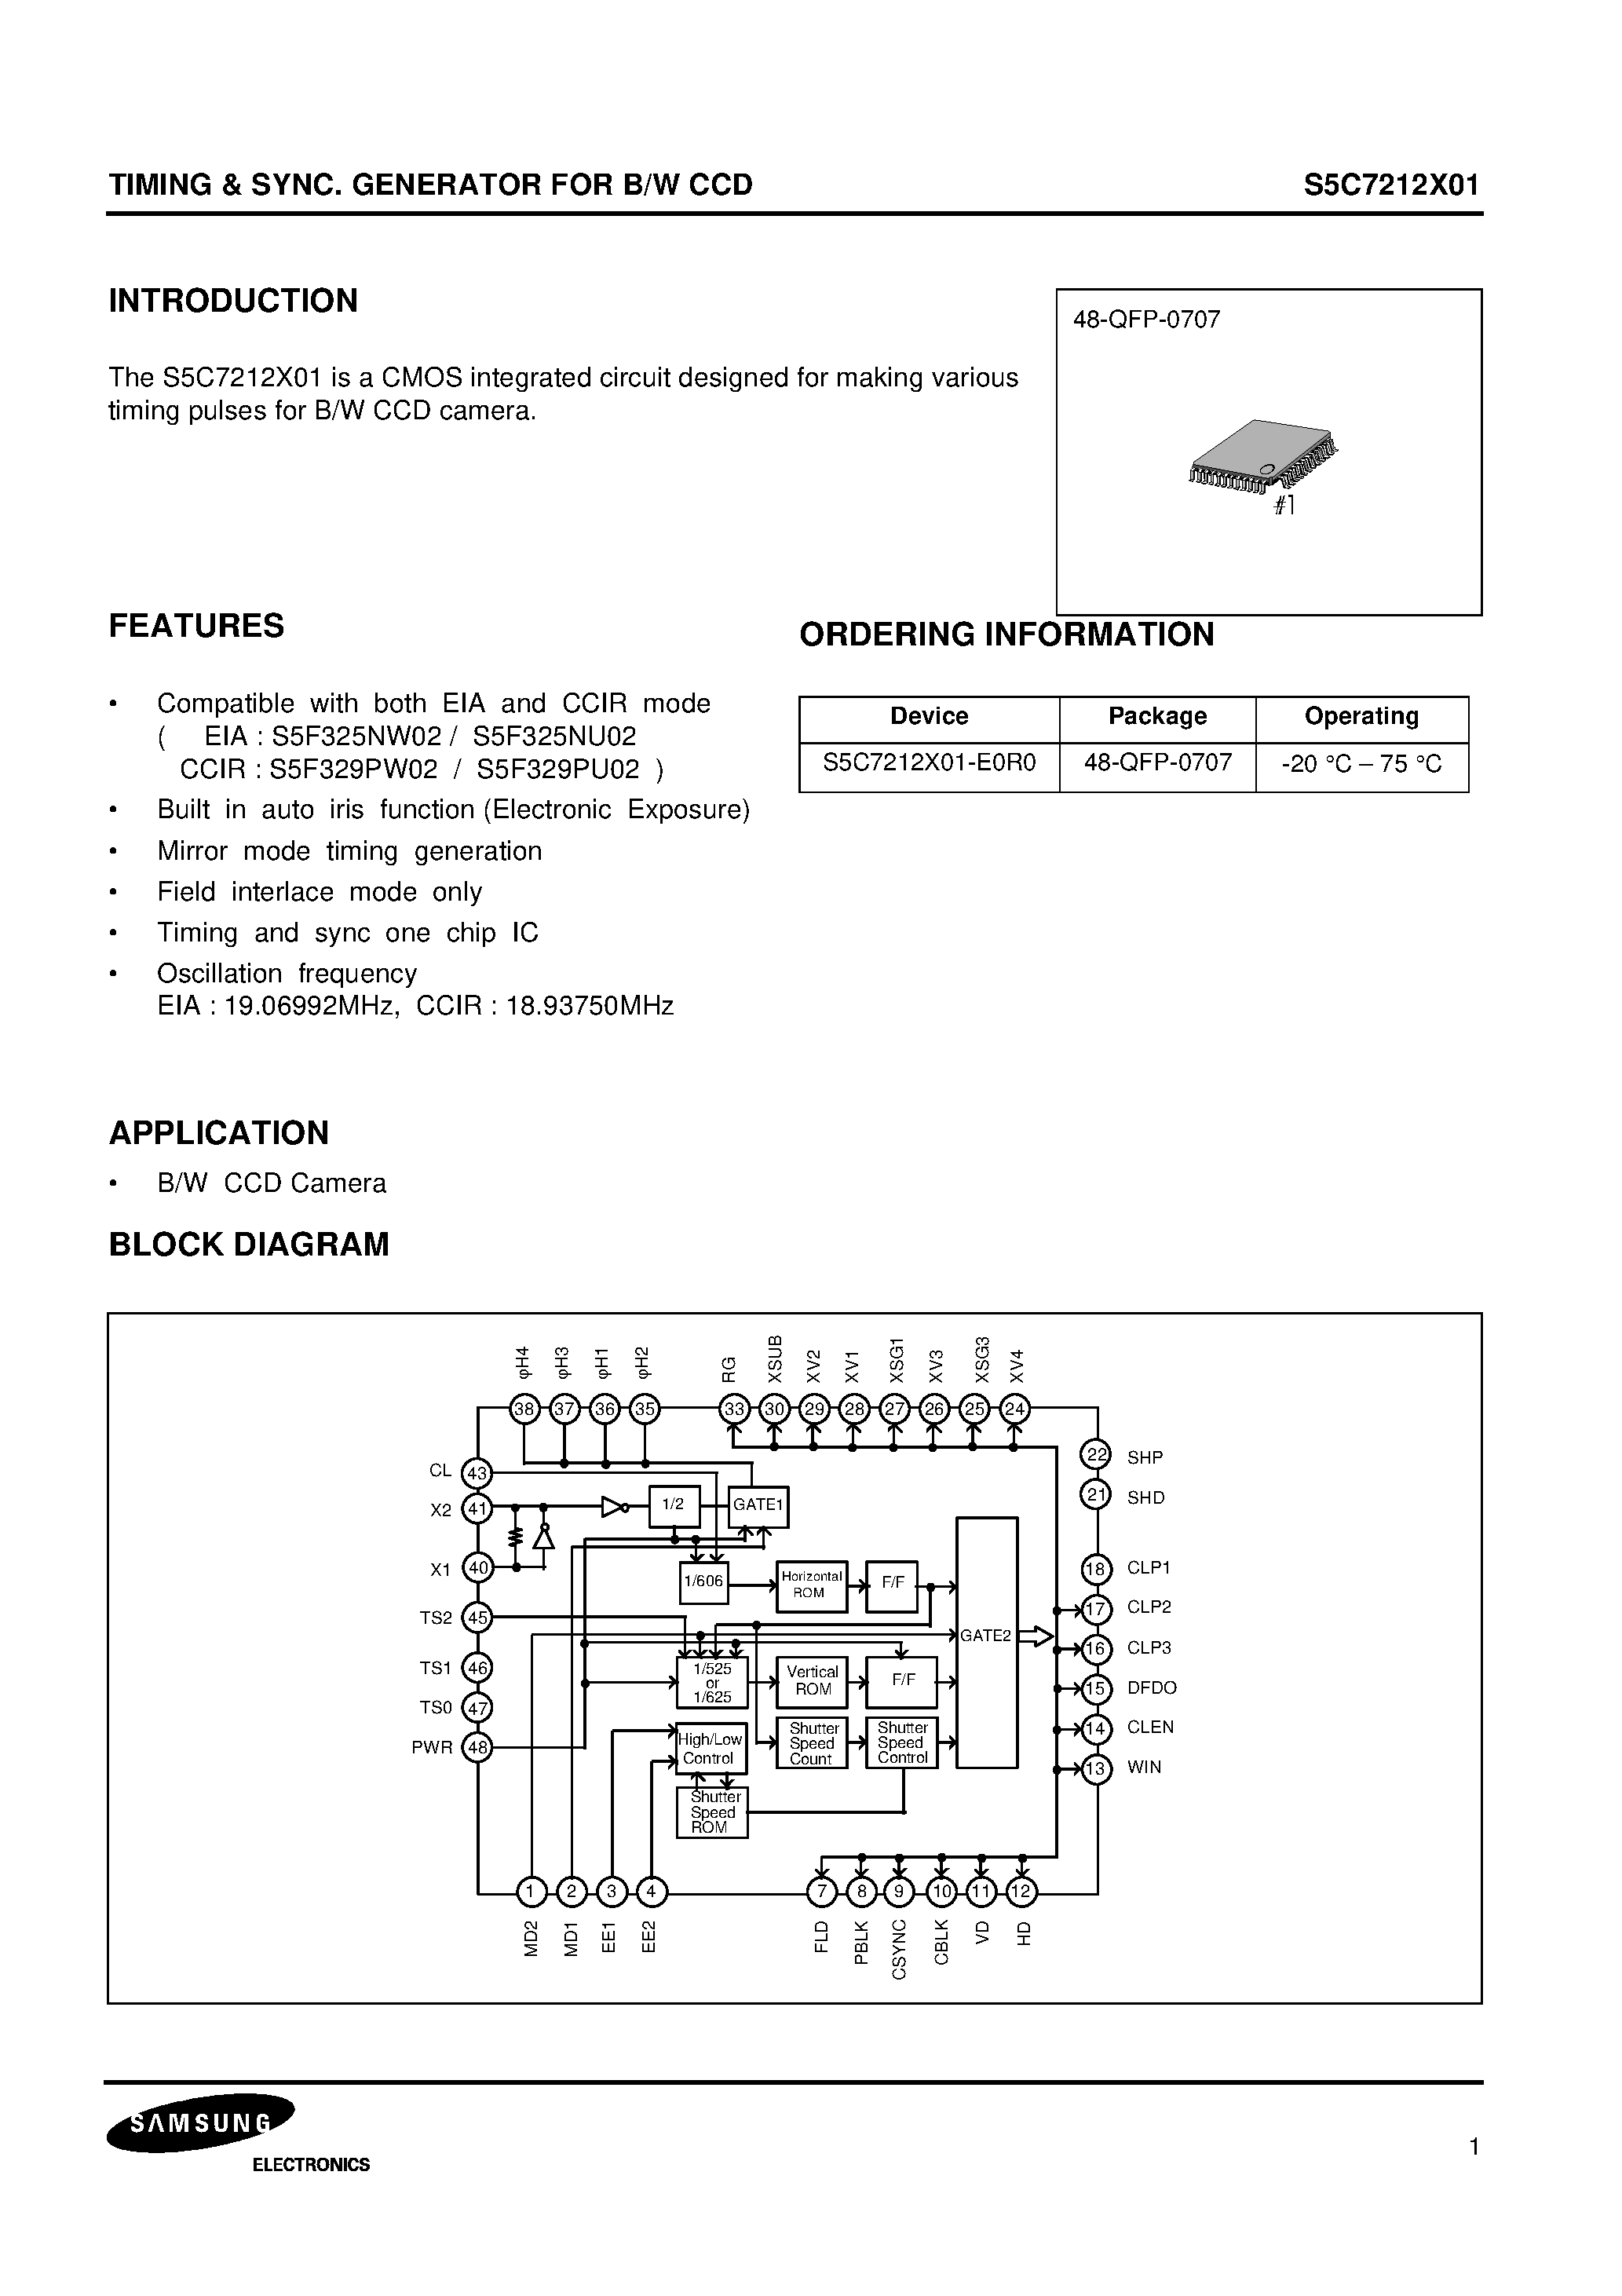 Datasheet S5C7212X01 - TIMING & SYNC. GENERATOR FOR B/W CCD page 1